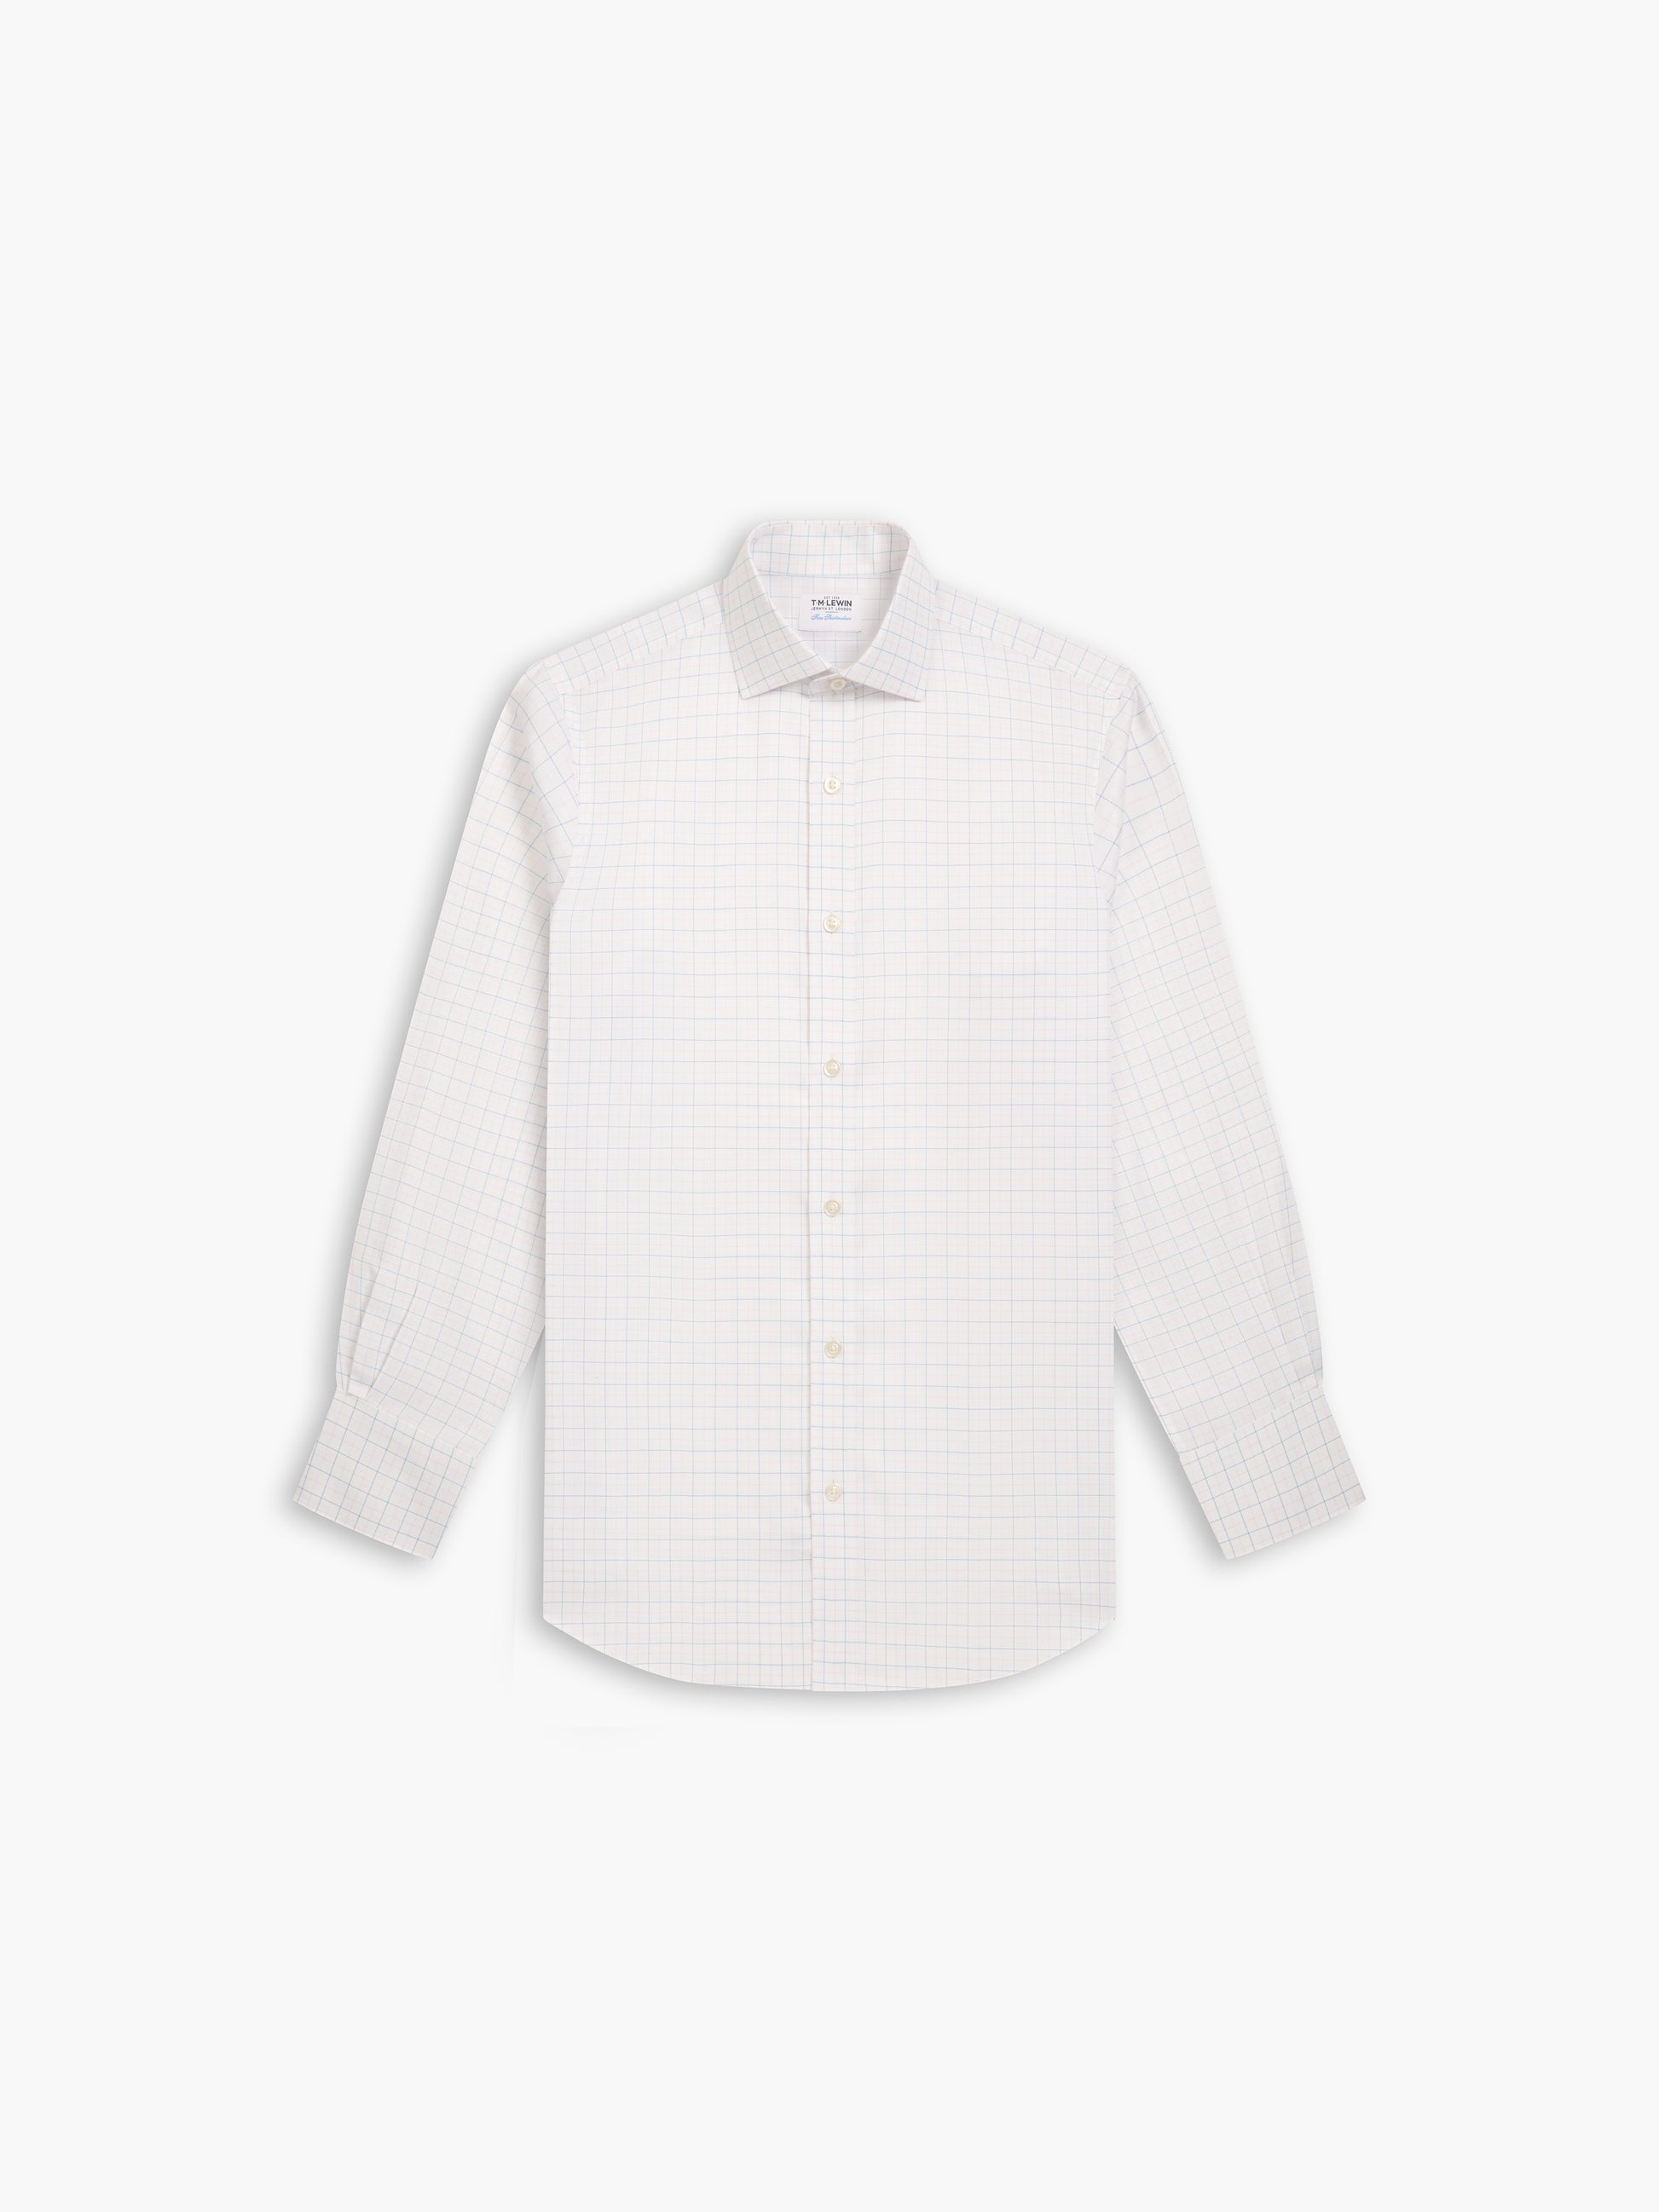 Image 2 of Non-Iron Blue & Pink Double Check Oxford Regular Fit Single Cuff Classic Collar Shirt